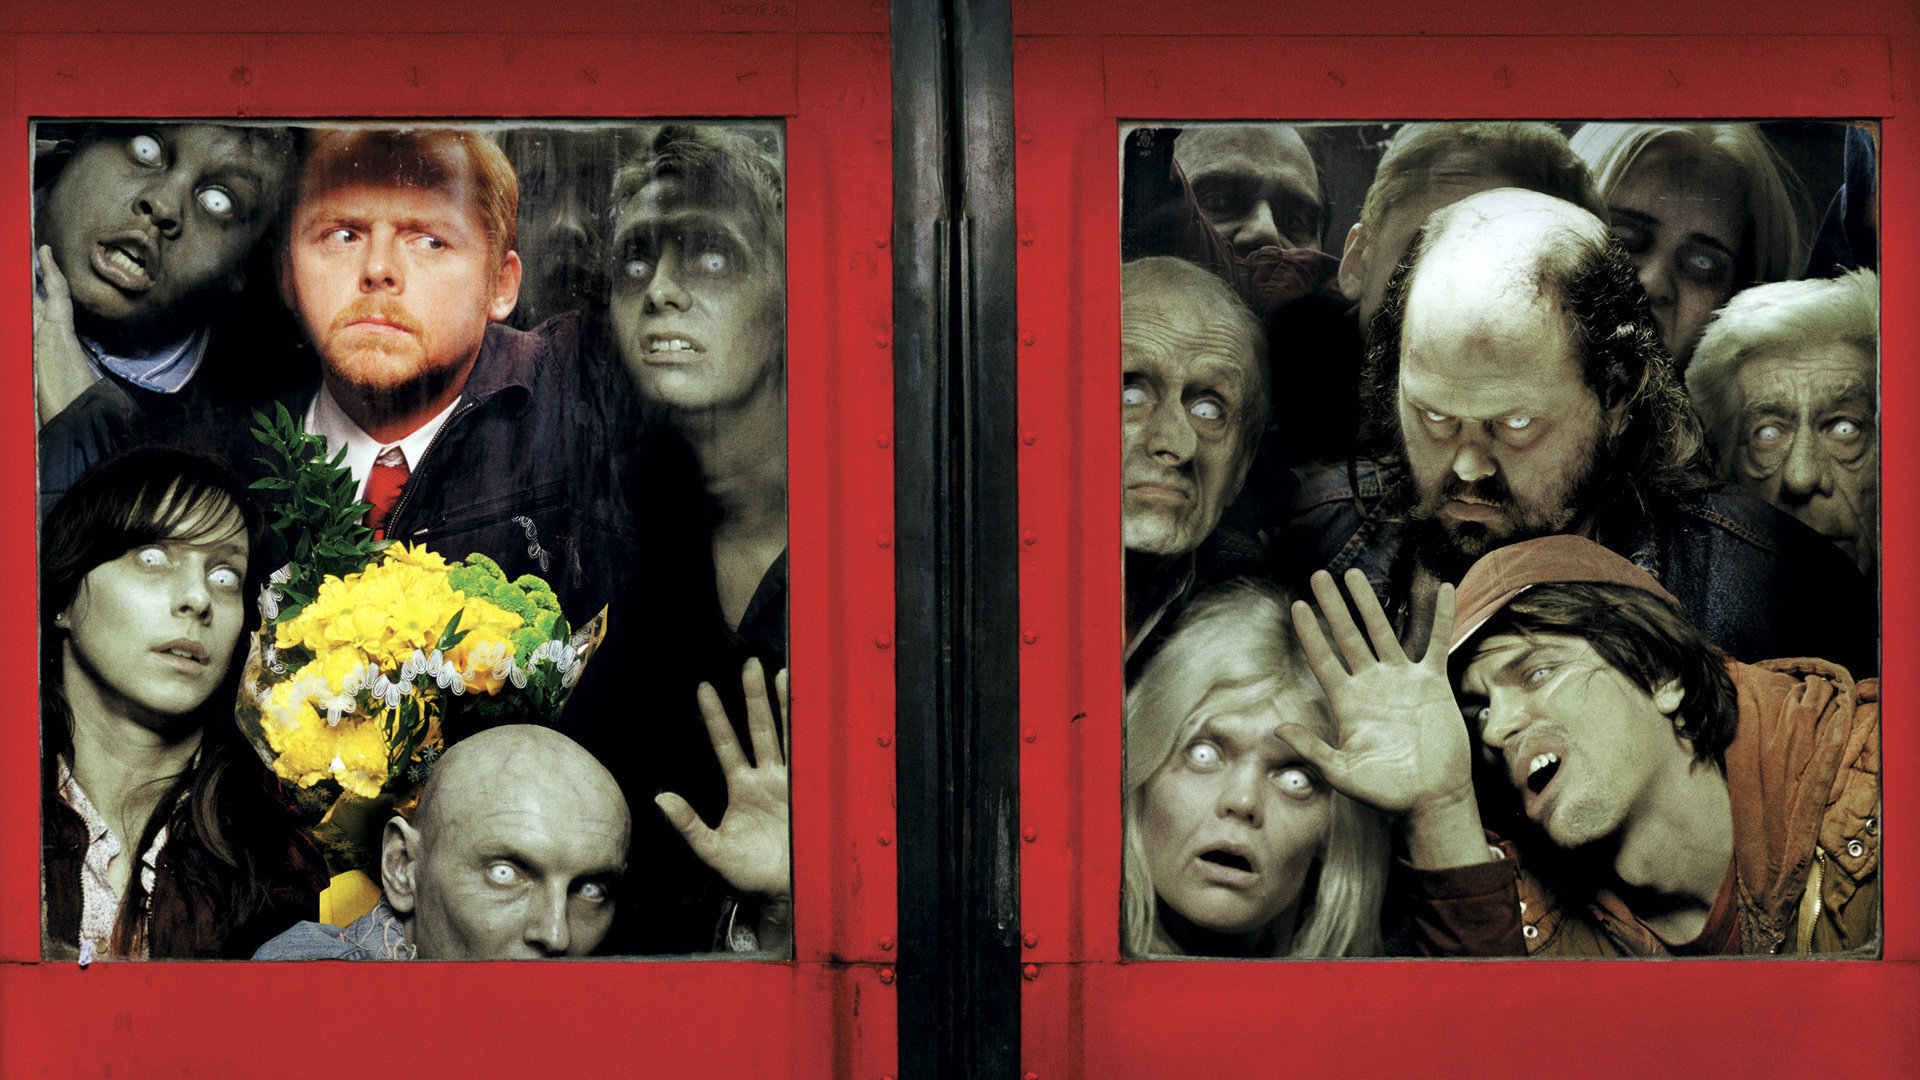 Awesome Shaun Of The Dead free wallpaper ID:374581 for full hd 1920x1080 desktop